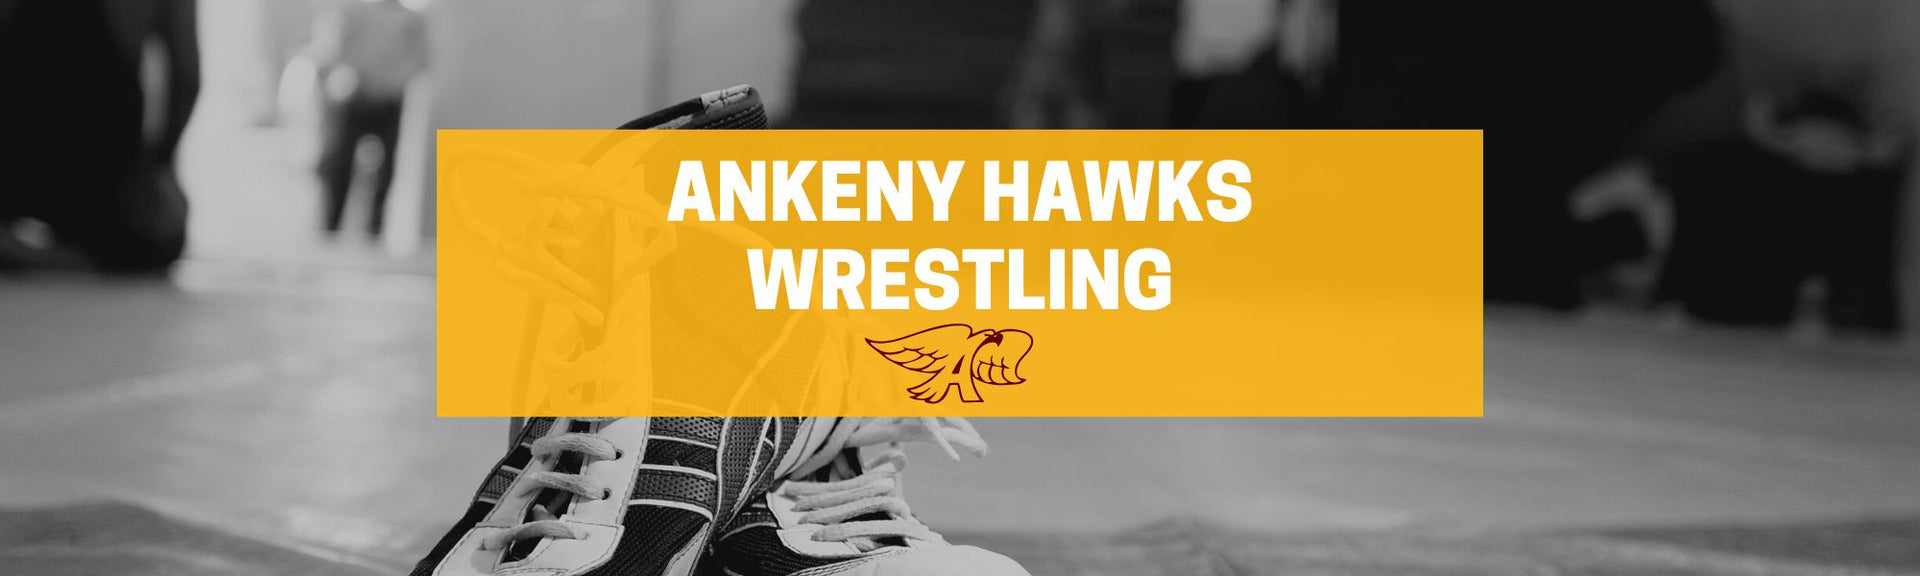 Ankeny Hawks Wrestling Collection